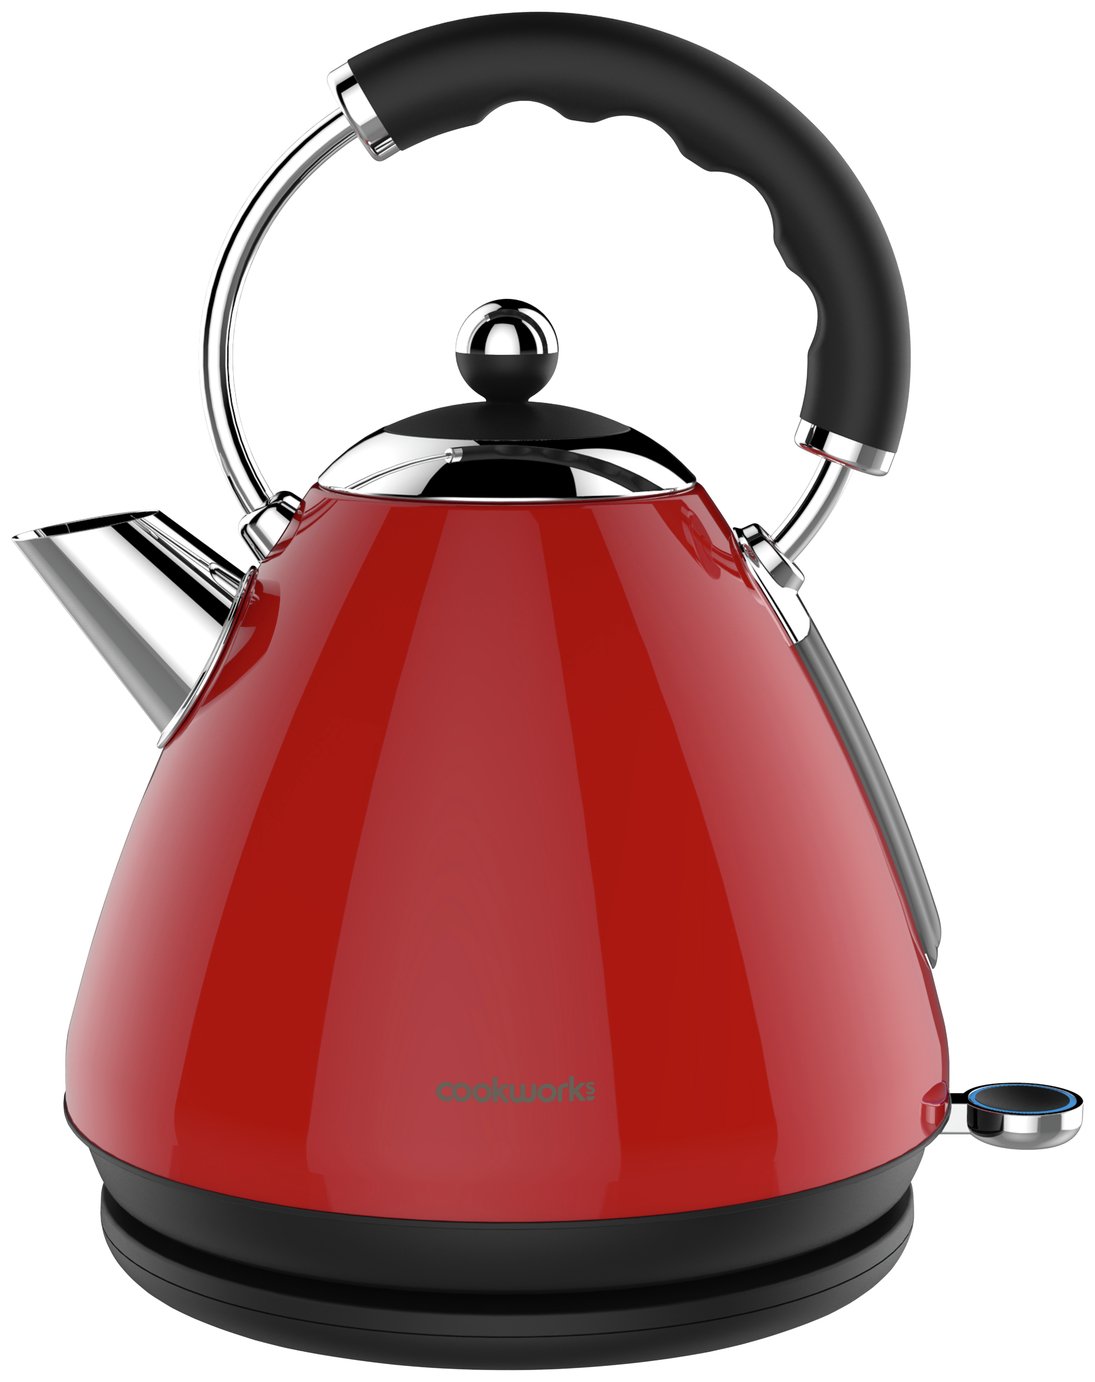 Buy Cookworks Pyramid Kettle - Red 